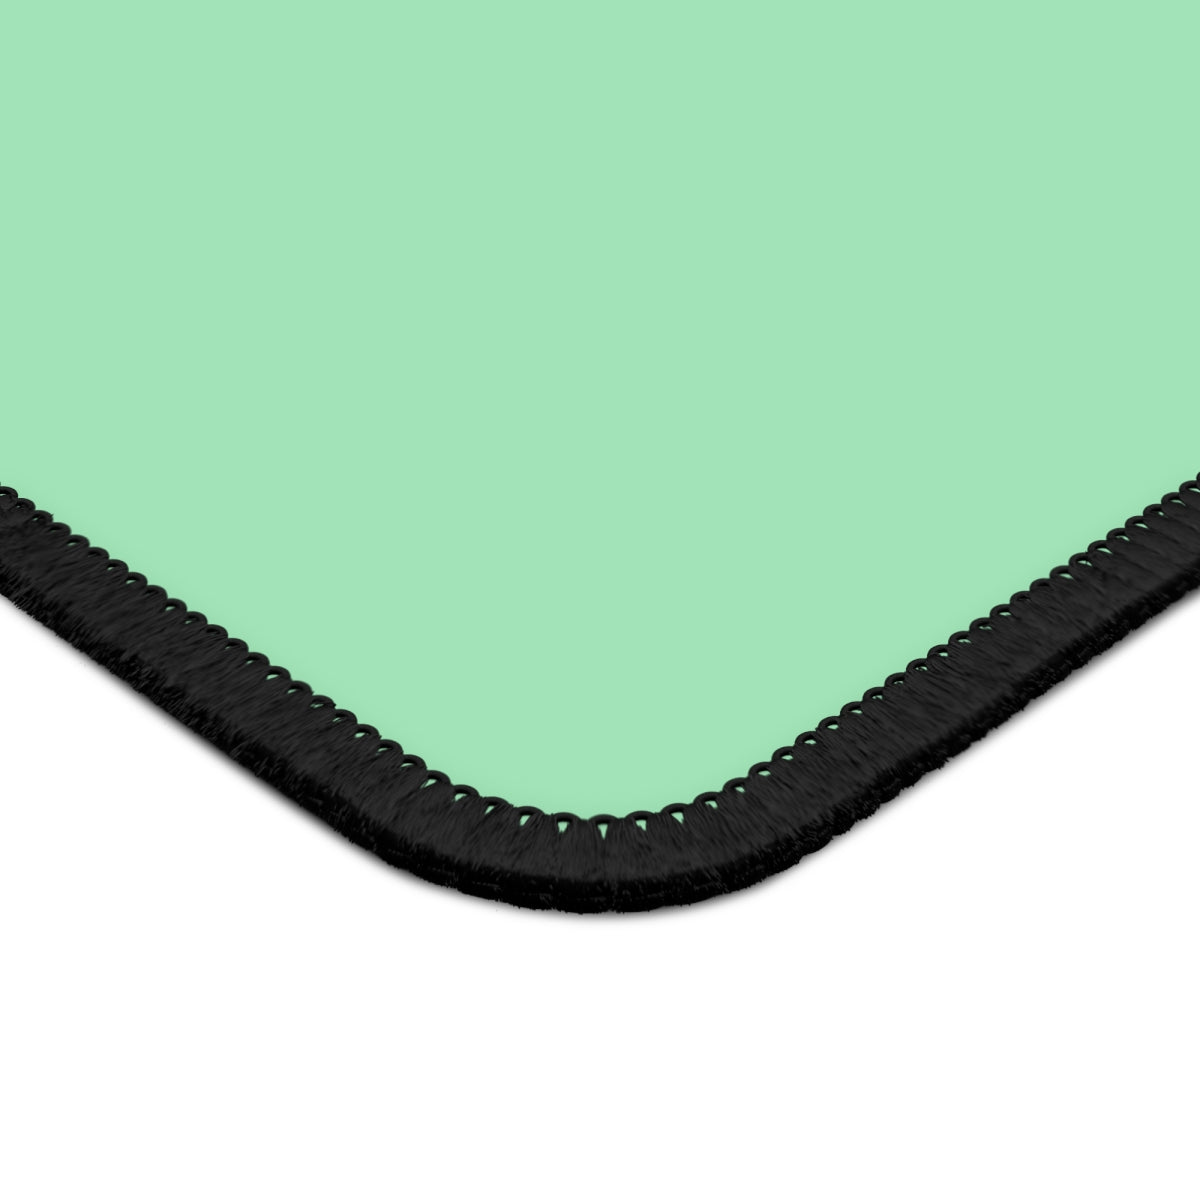 Mint Green Gaming Mouse Pad - Desk Cookies